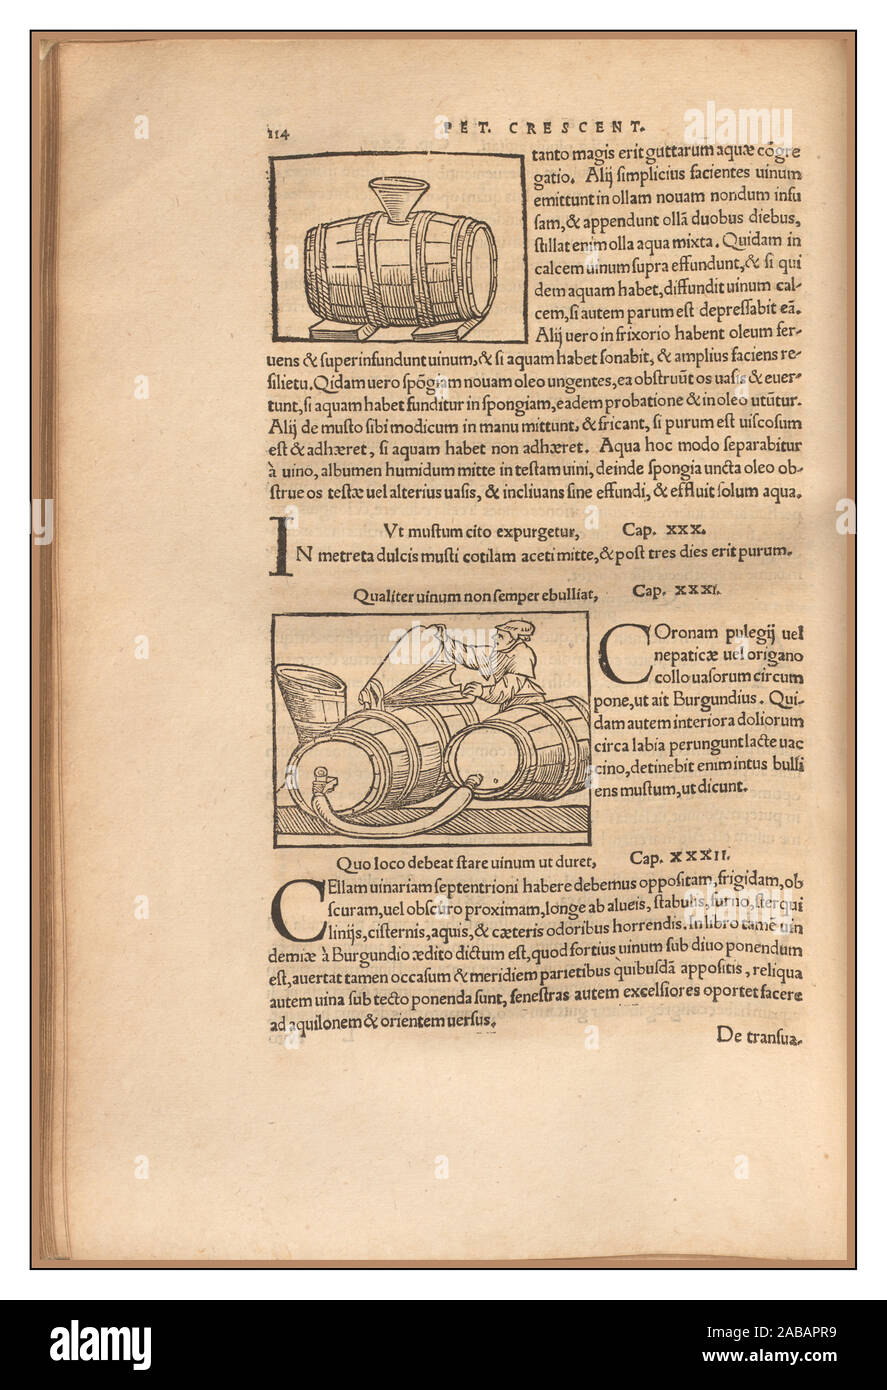 Vintage viticulture historic wine management production 1500's latin text and illustrations on early wine production page by Pietro de Crescenzi an Italian writer on horticulture Stock Photo